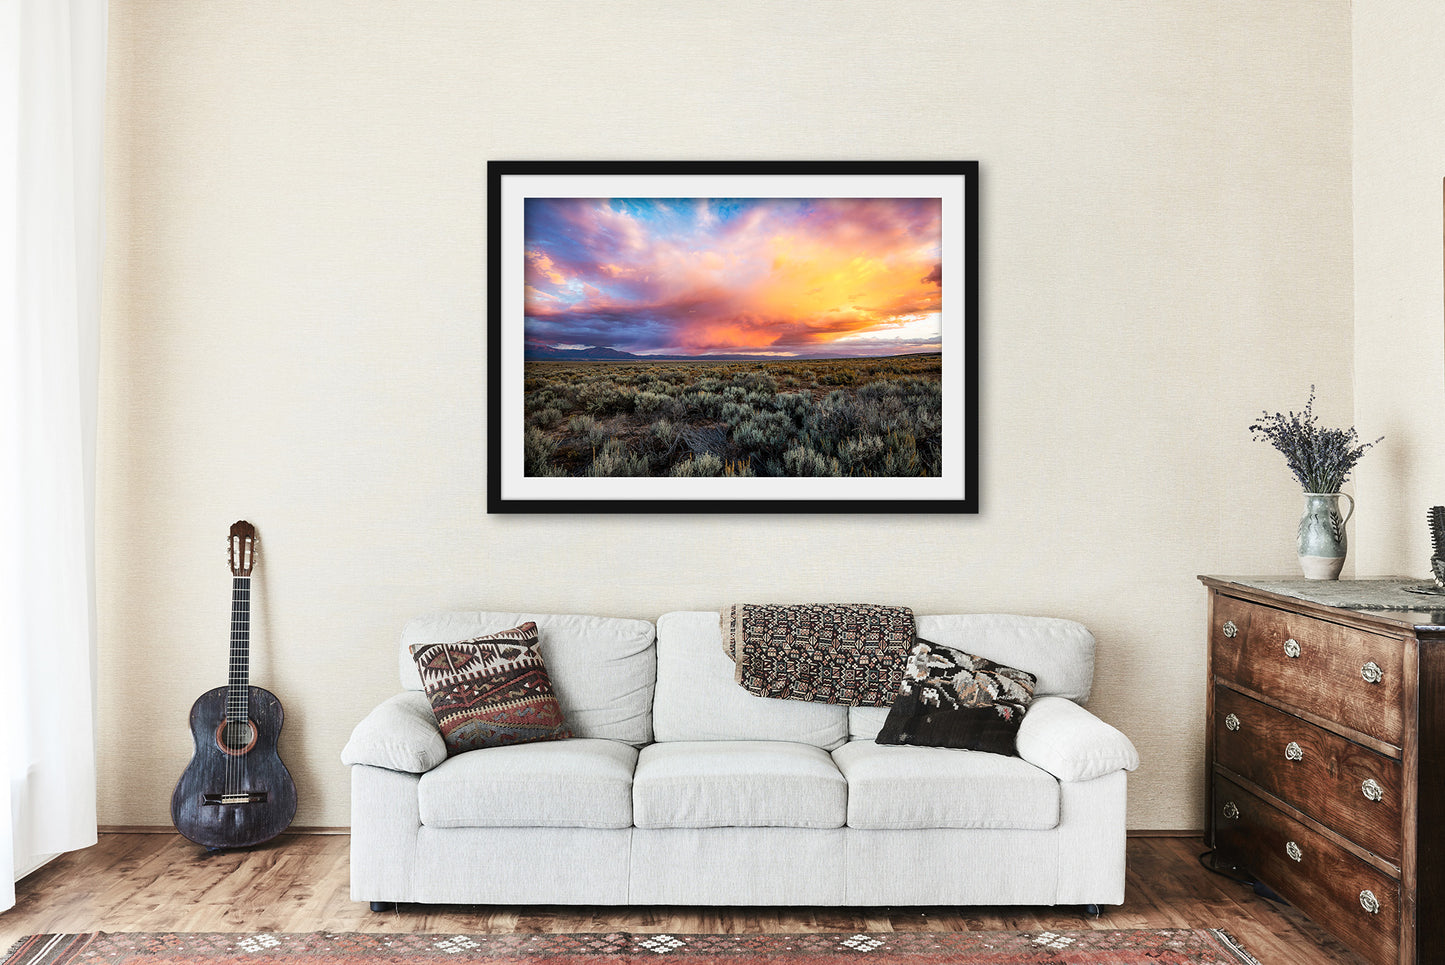 Framed Print - Ready to Hang Wall Art of Colorful Storm Cloud Over Sagebrush near Taos New Mexico - Southwestern Photo Artwork Decor